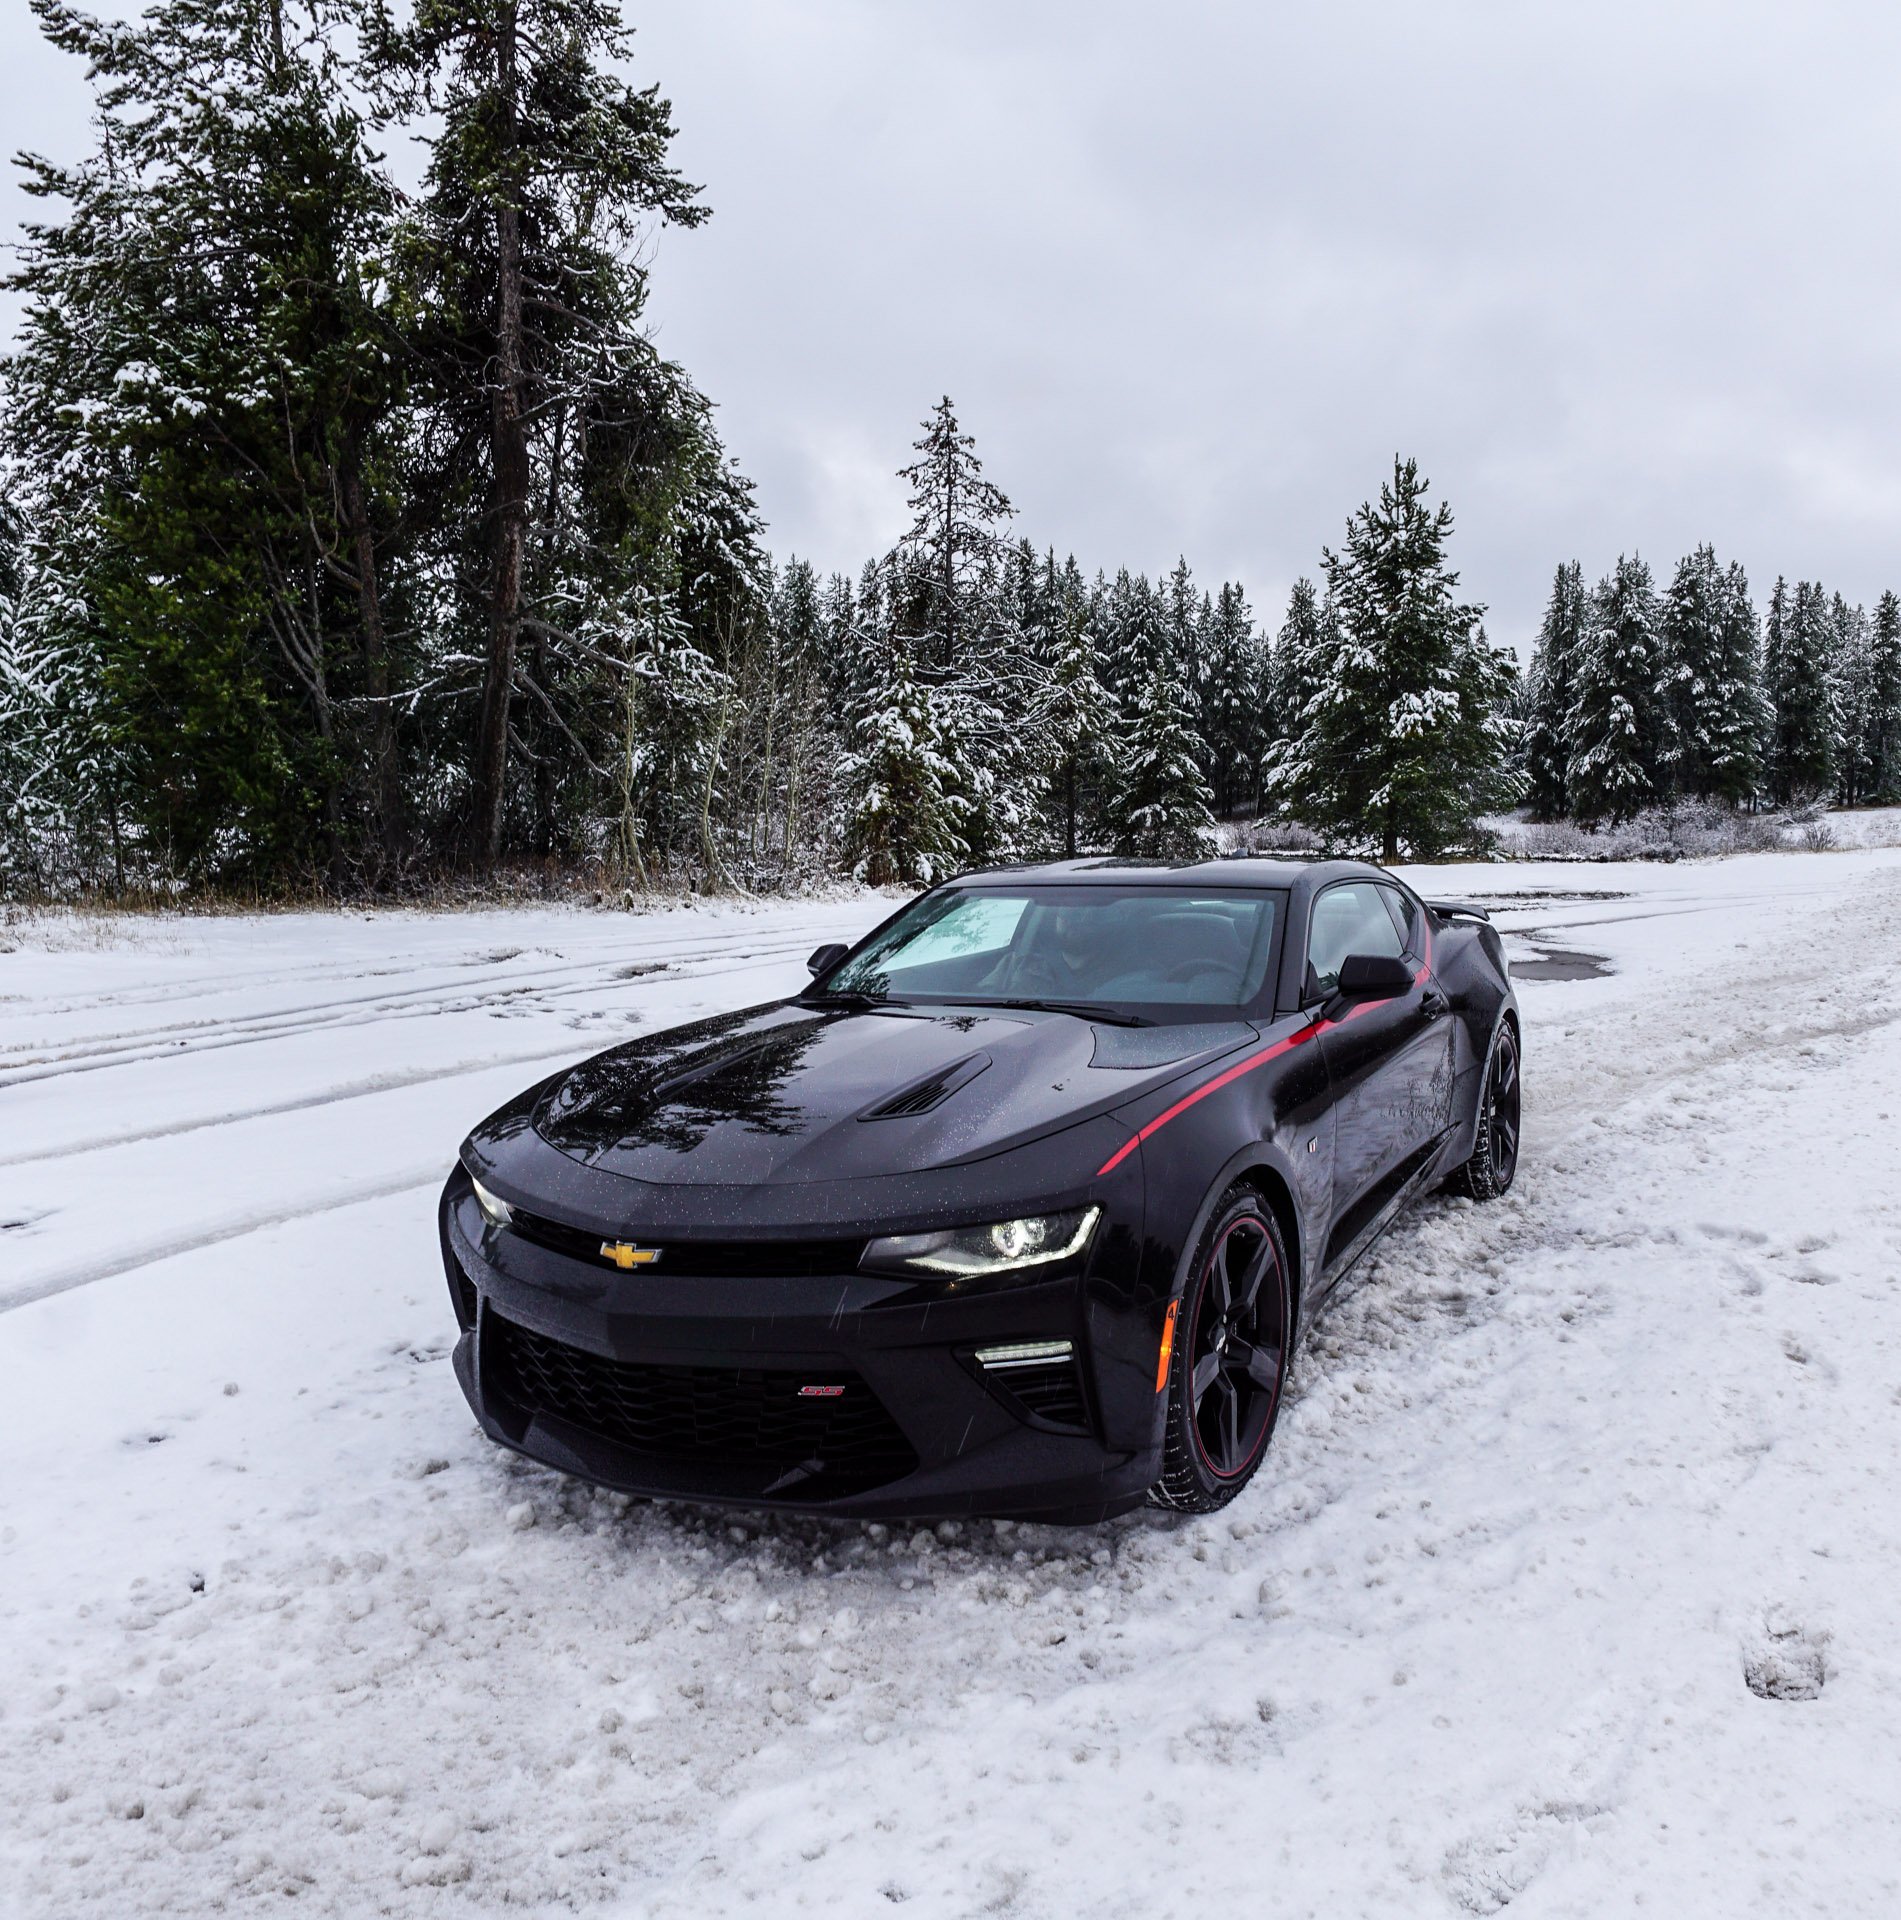 Our Awesome Camaro Road Trip